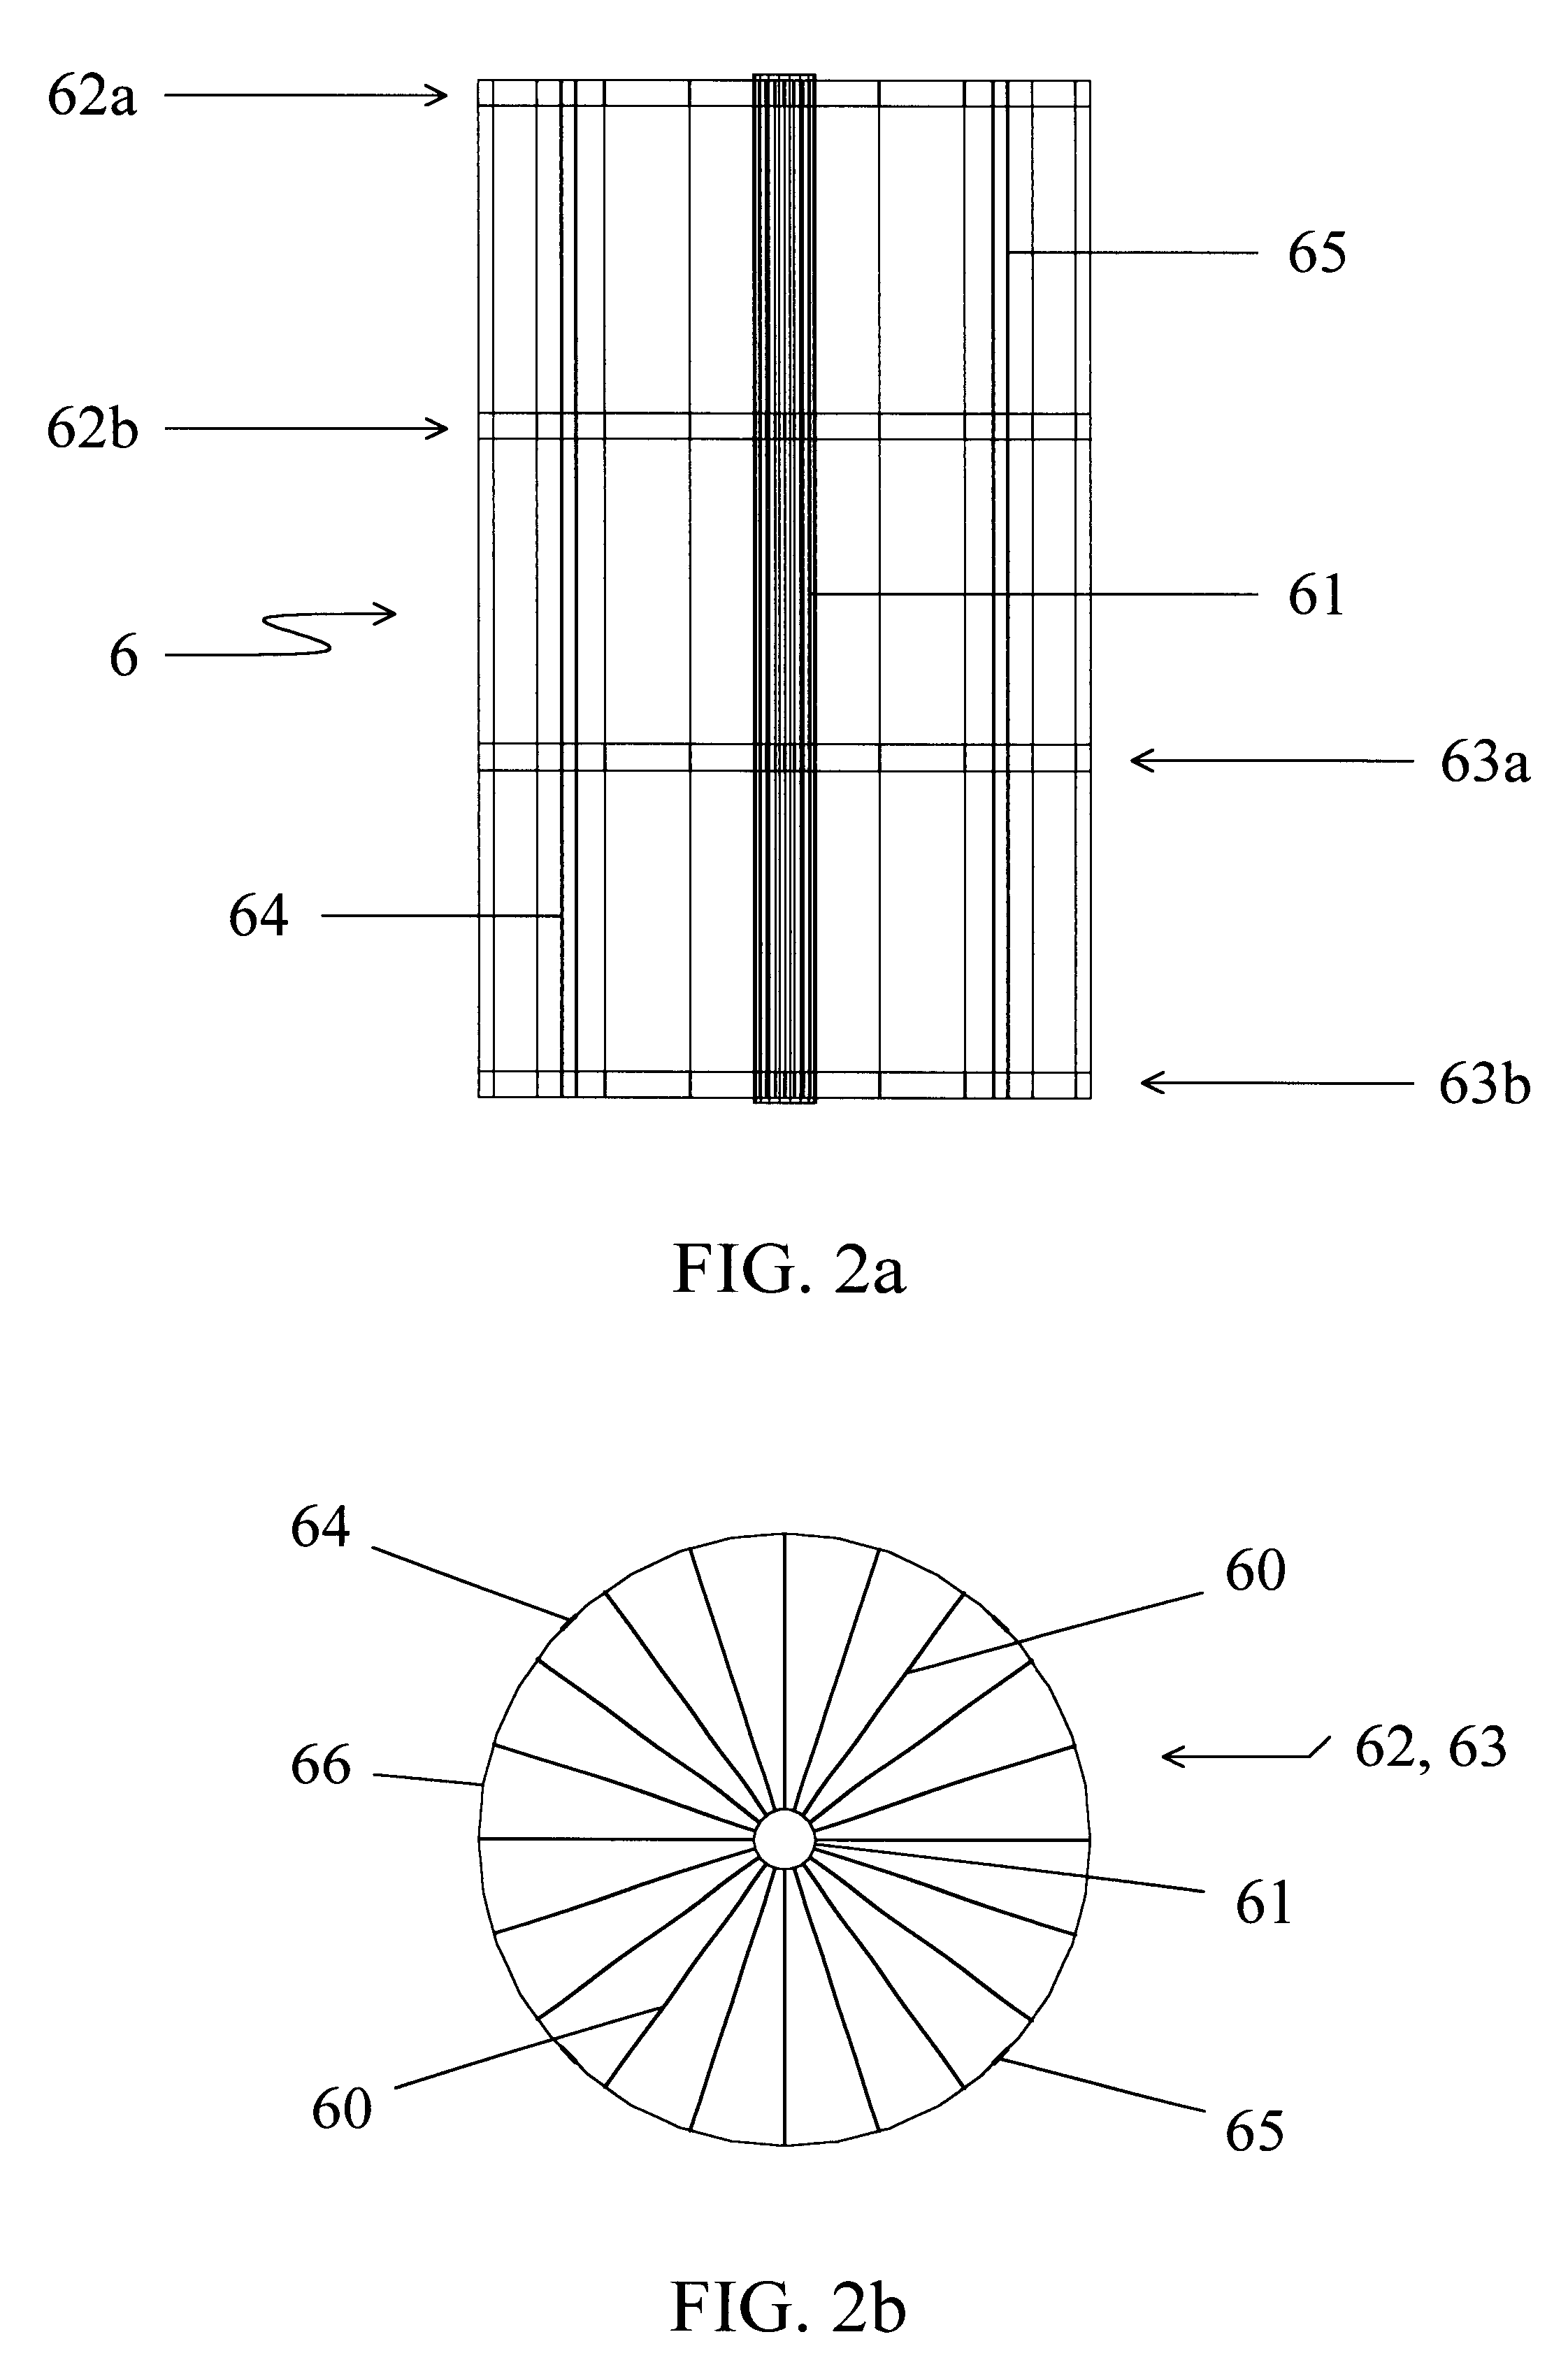 Anaerobic digester system and method